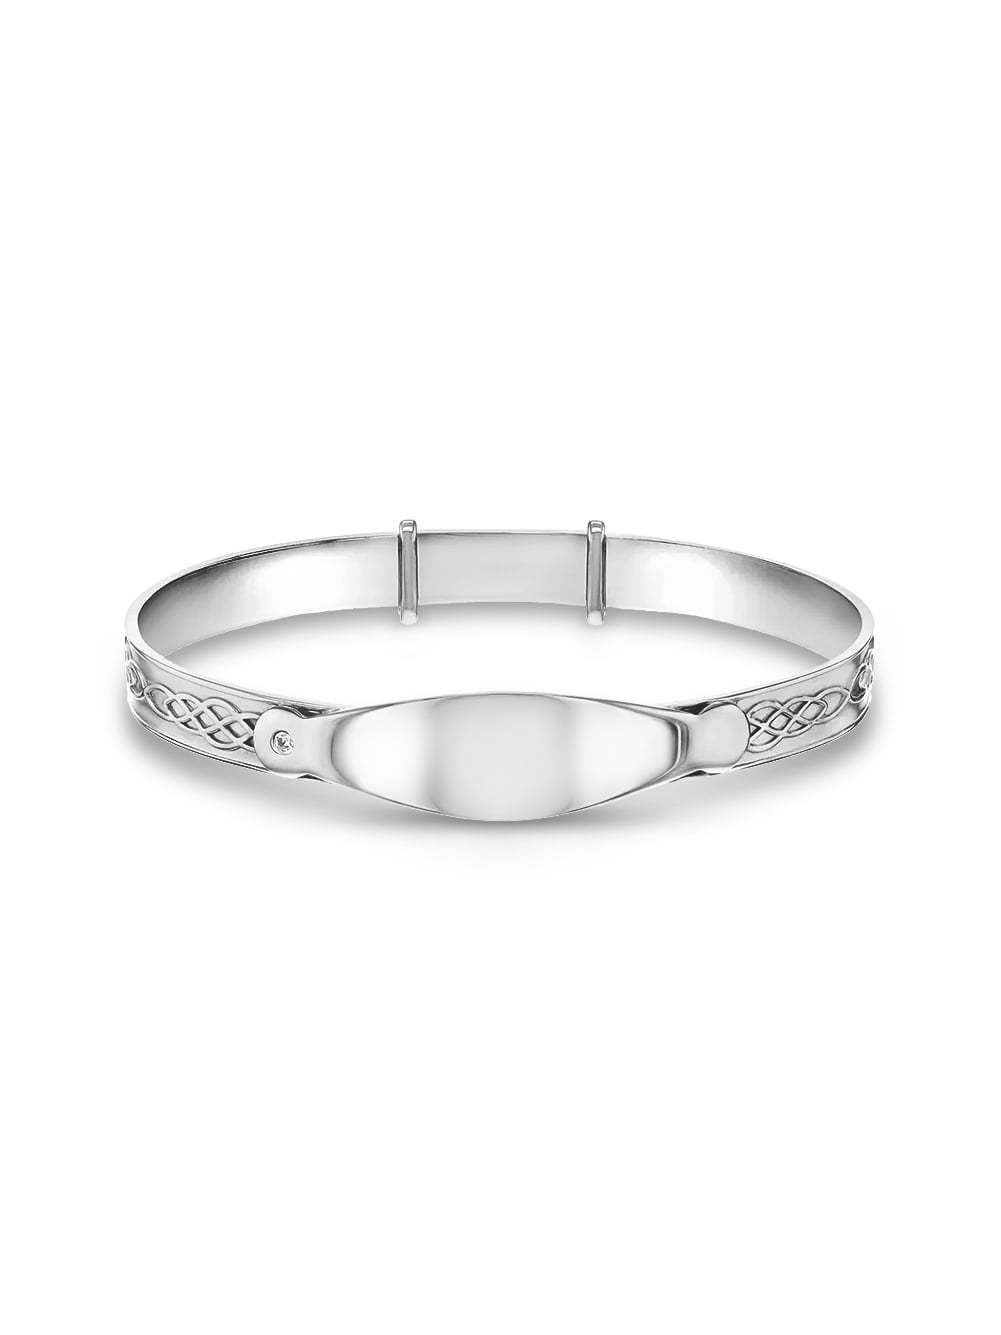 Buy Baby Silver Bangle Online In India - Etsy India